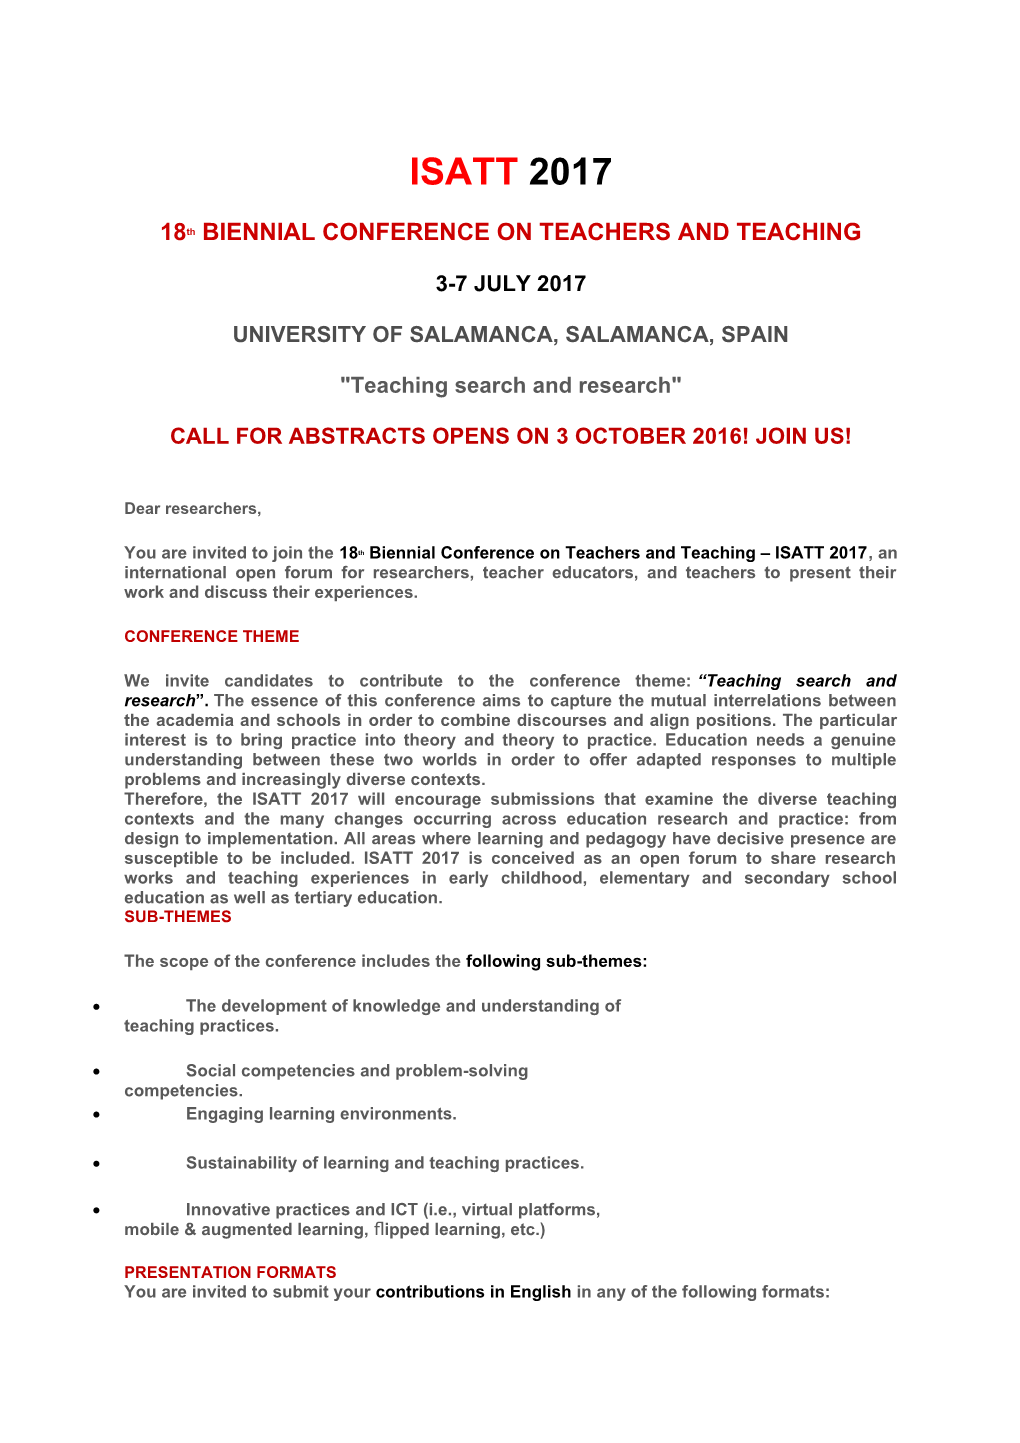 18Thbiennial CONFERENCE on TEACHERS and TEACHING